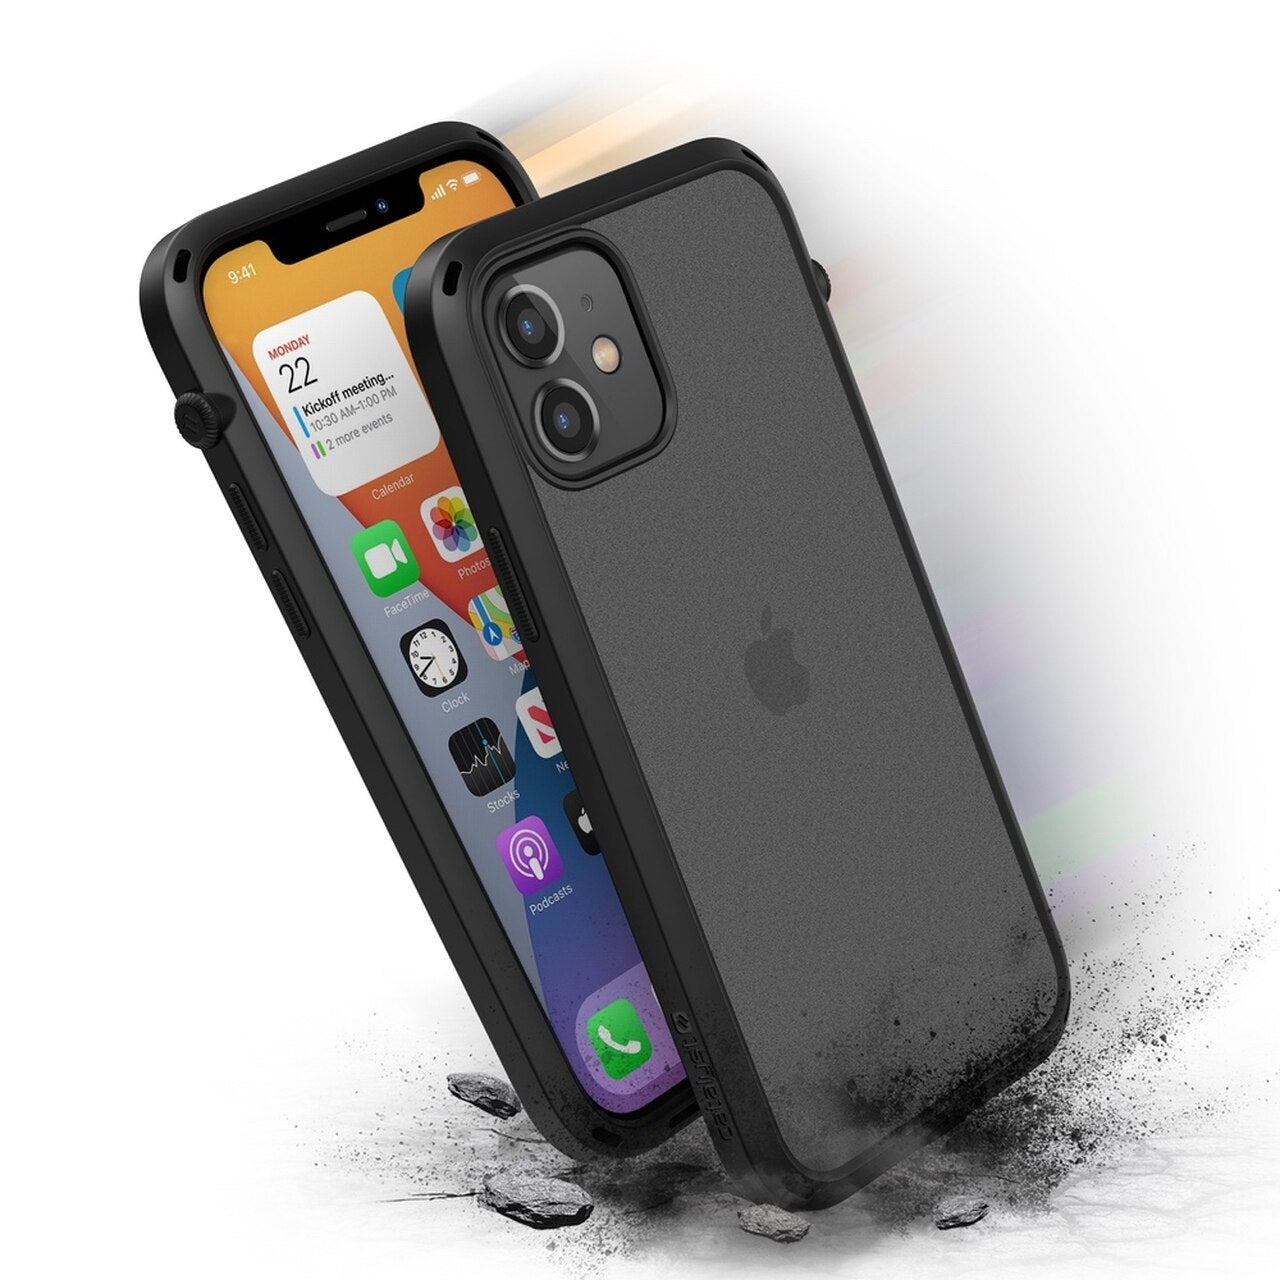 Catalyst Influence Impact Case for iPhone 12 / 12 Pro - Black